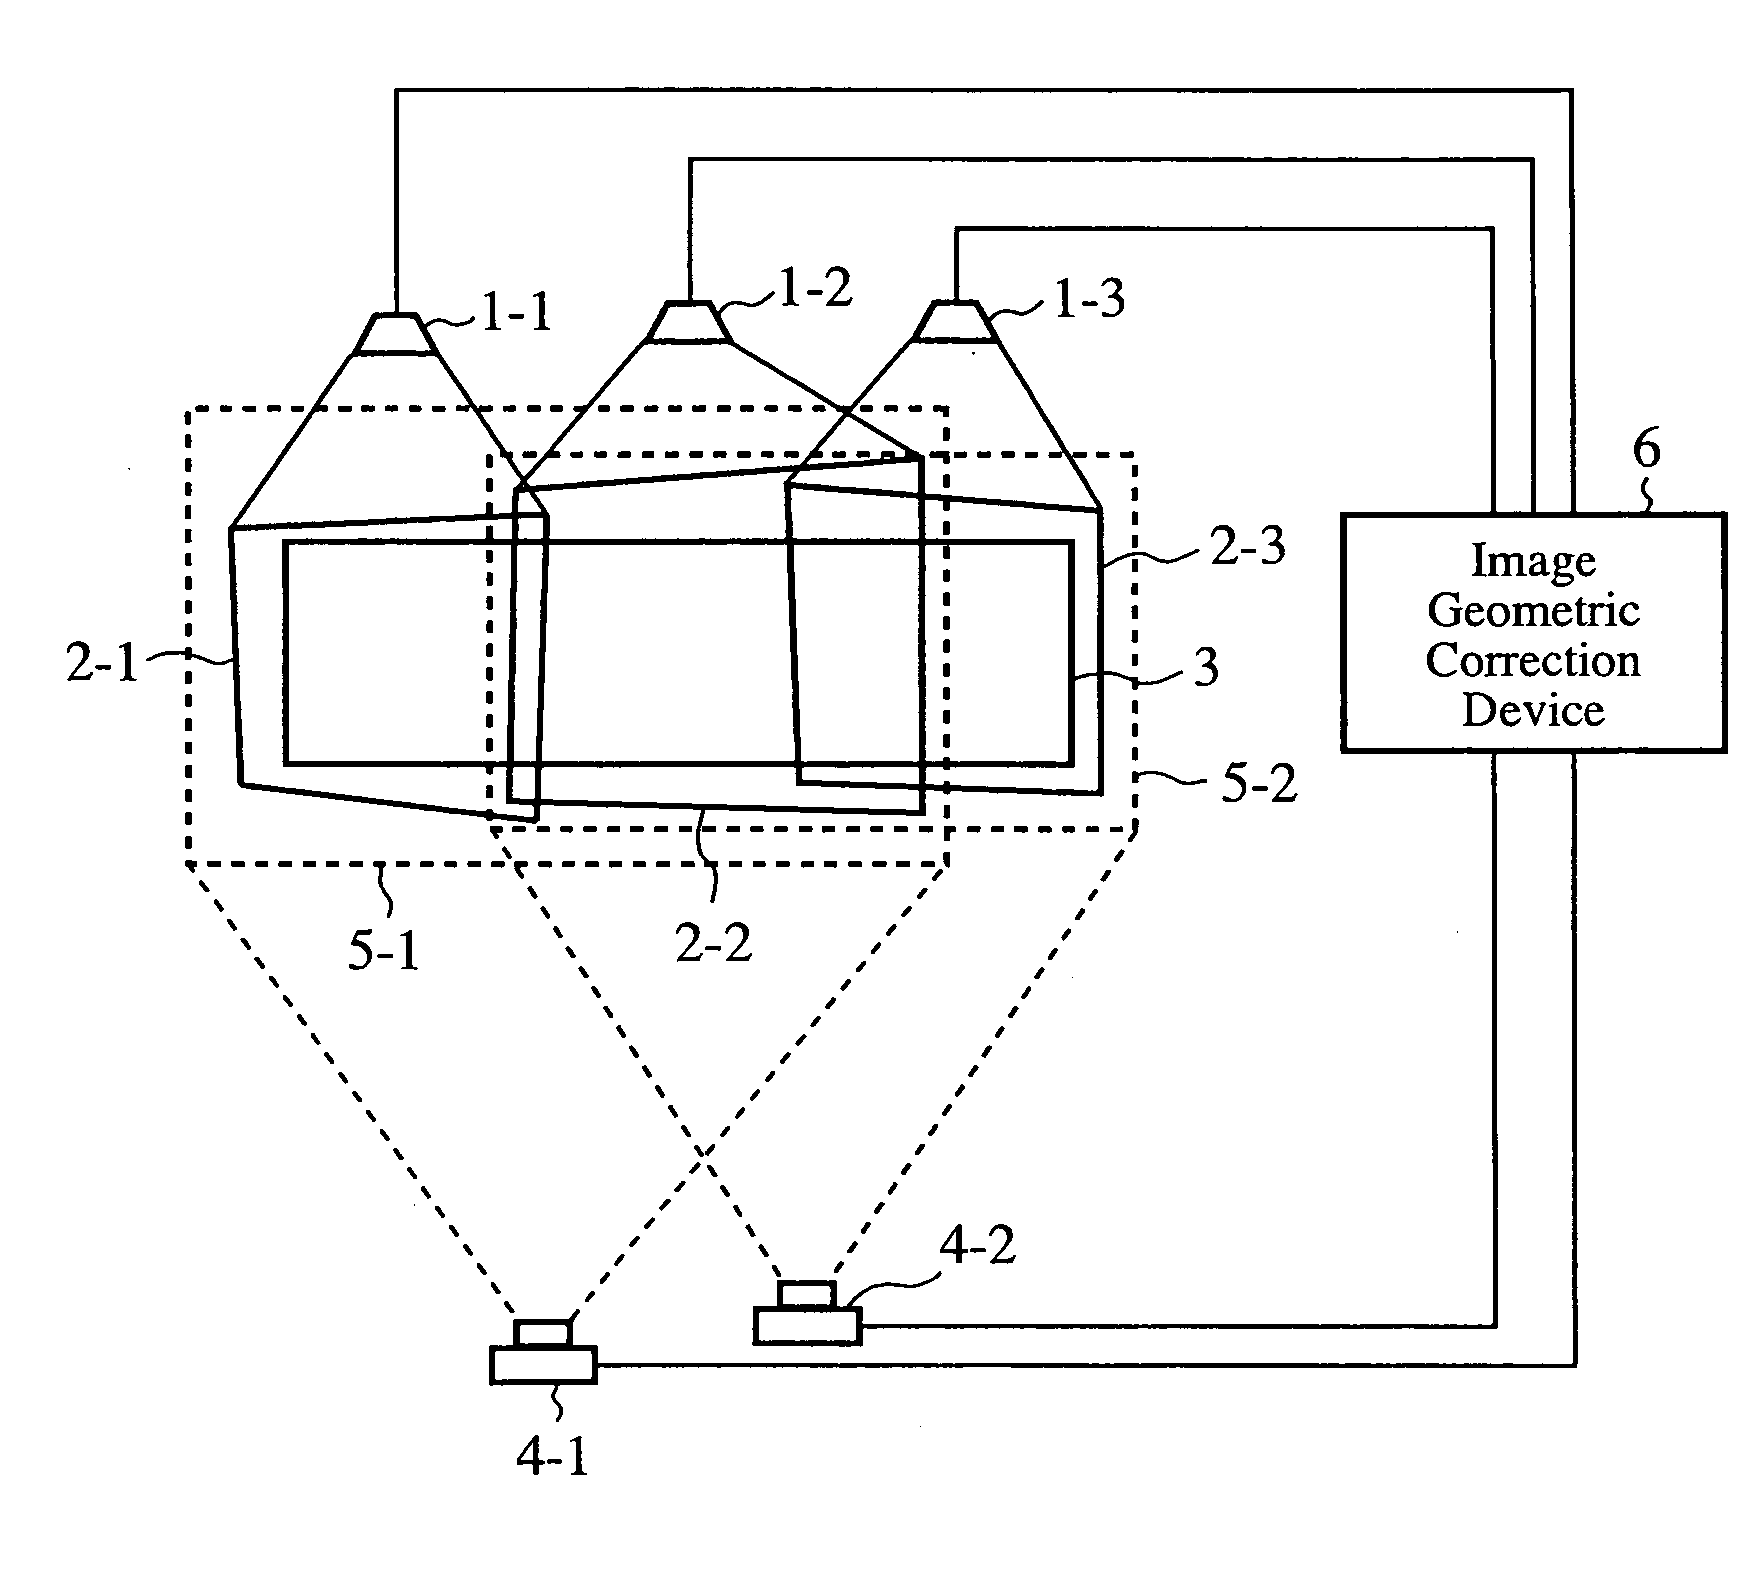 Image Projection System and Image Geometric Correction Device